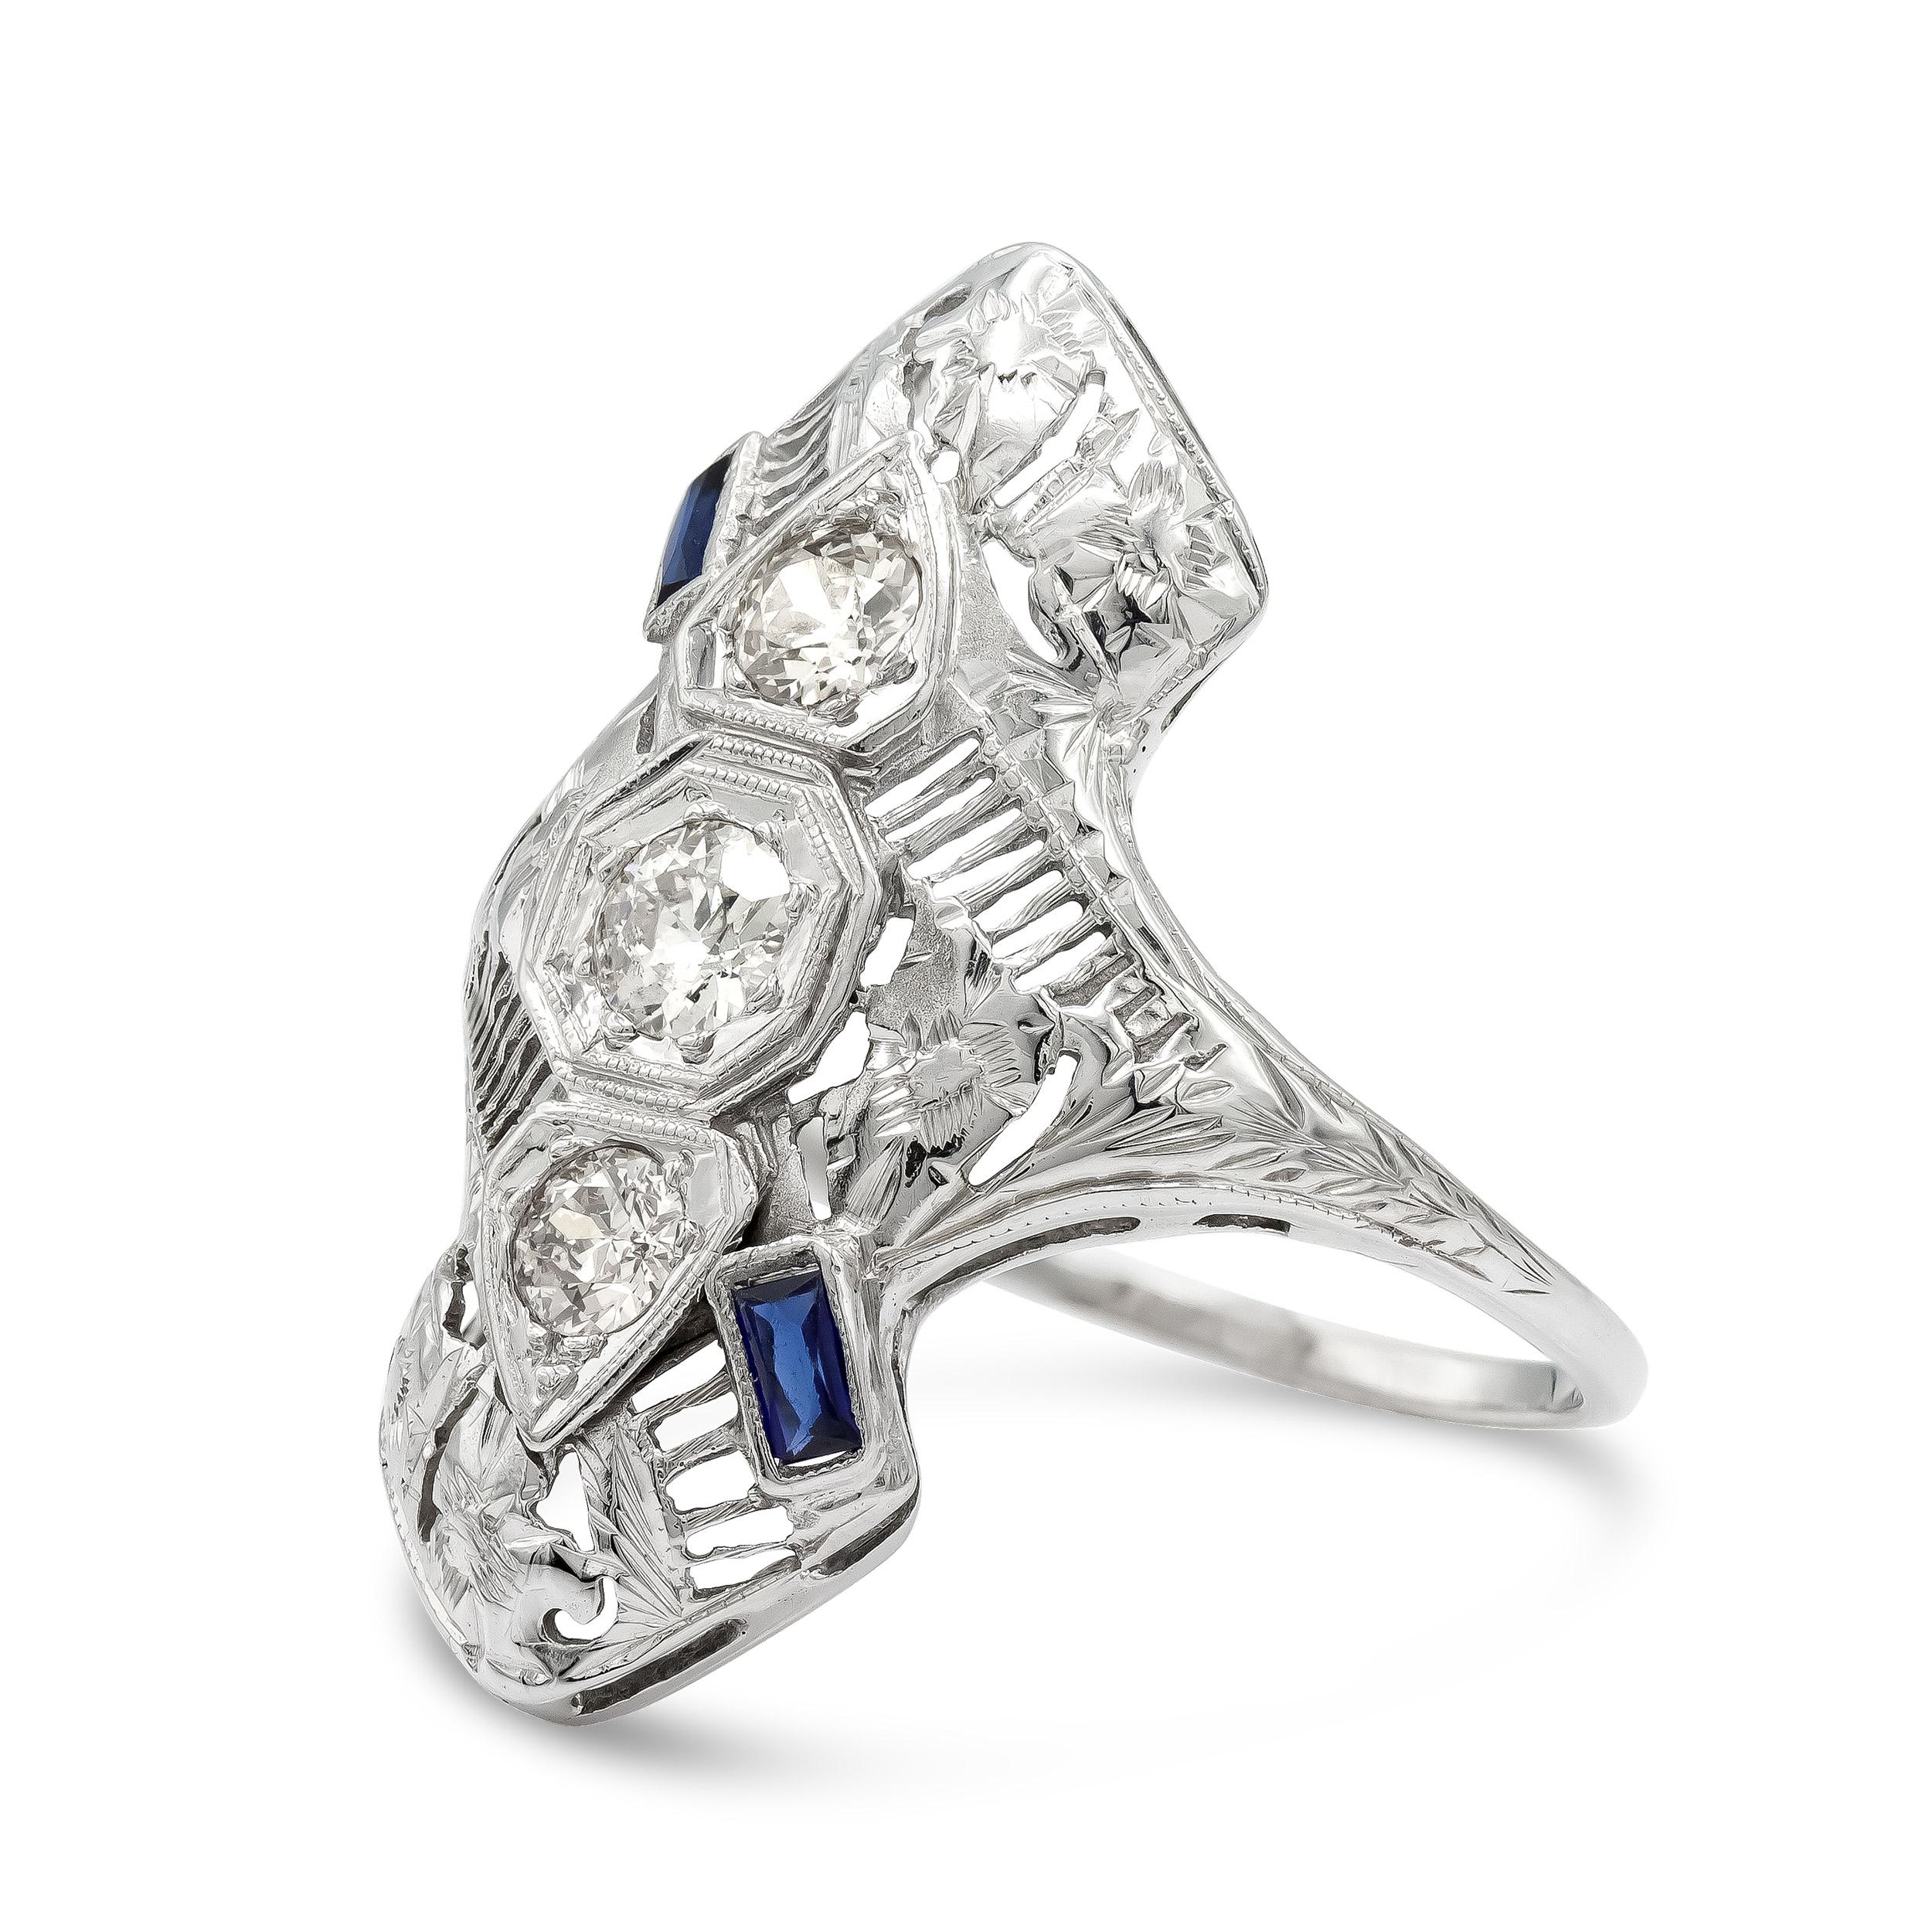 Here's a twist on a trilogy ring you didn't know you needed. Three old European cut diamonds weighing just over 0.50 carats are fashioned in this unique pointed setting. The unique shape paired with the two french cut sapphires make this low profile